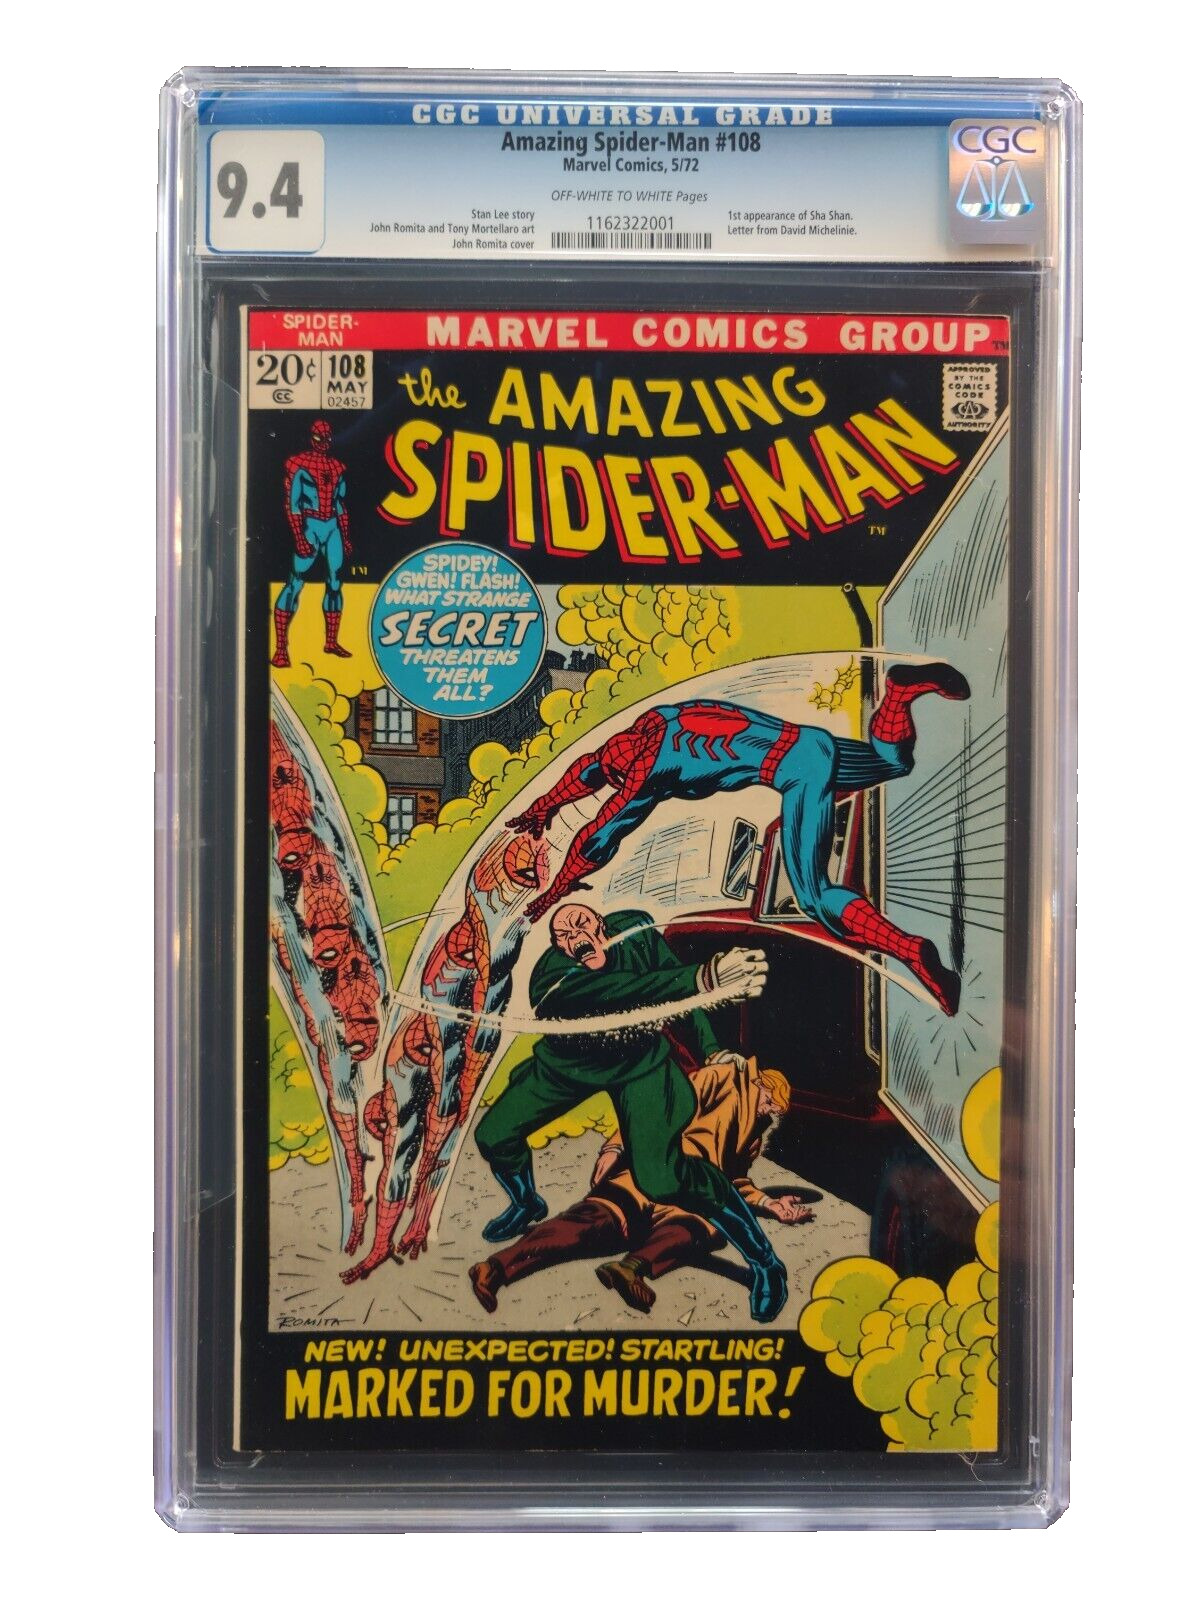 AMAZING SPIDER-MAN #108 CGC 9.4 OW-W PAGES- MARVEL COMICS 1972 - FIRST SHA-SHAN